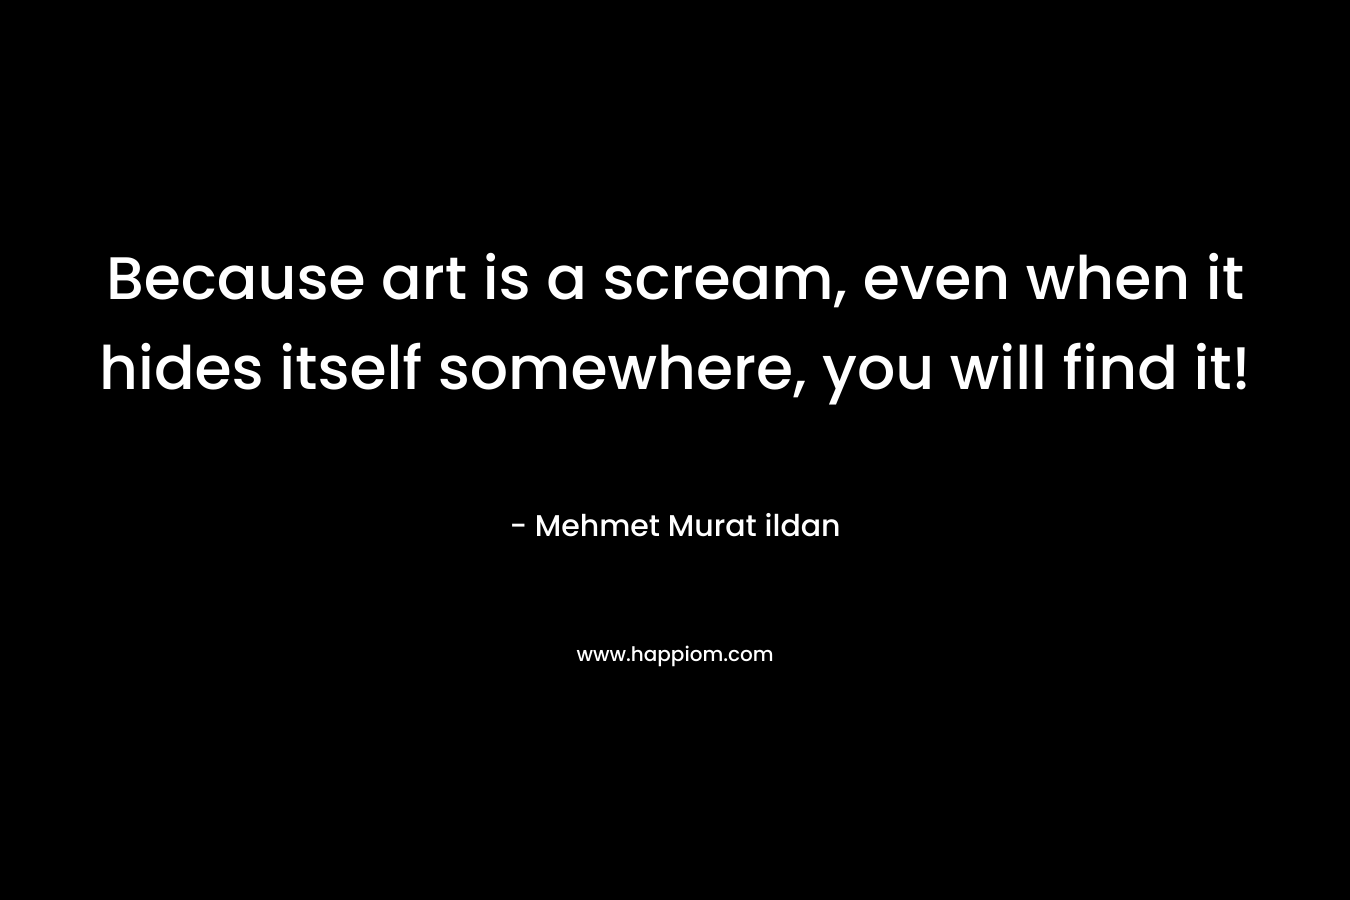 Because art is a scream, even when it hides itself somewhere, you will find it!